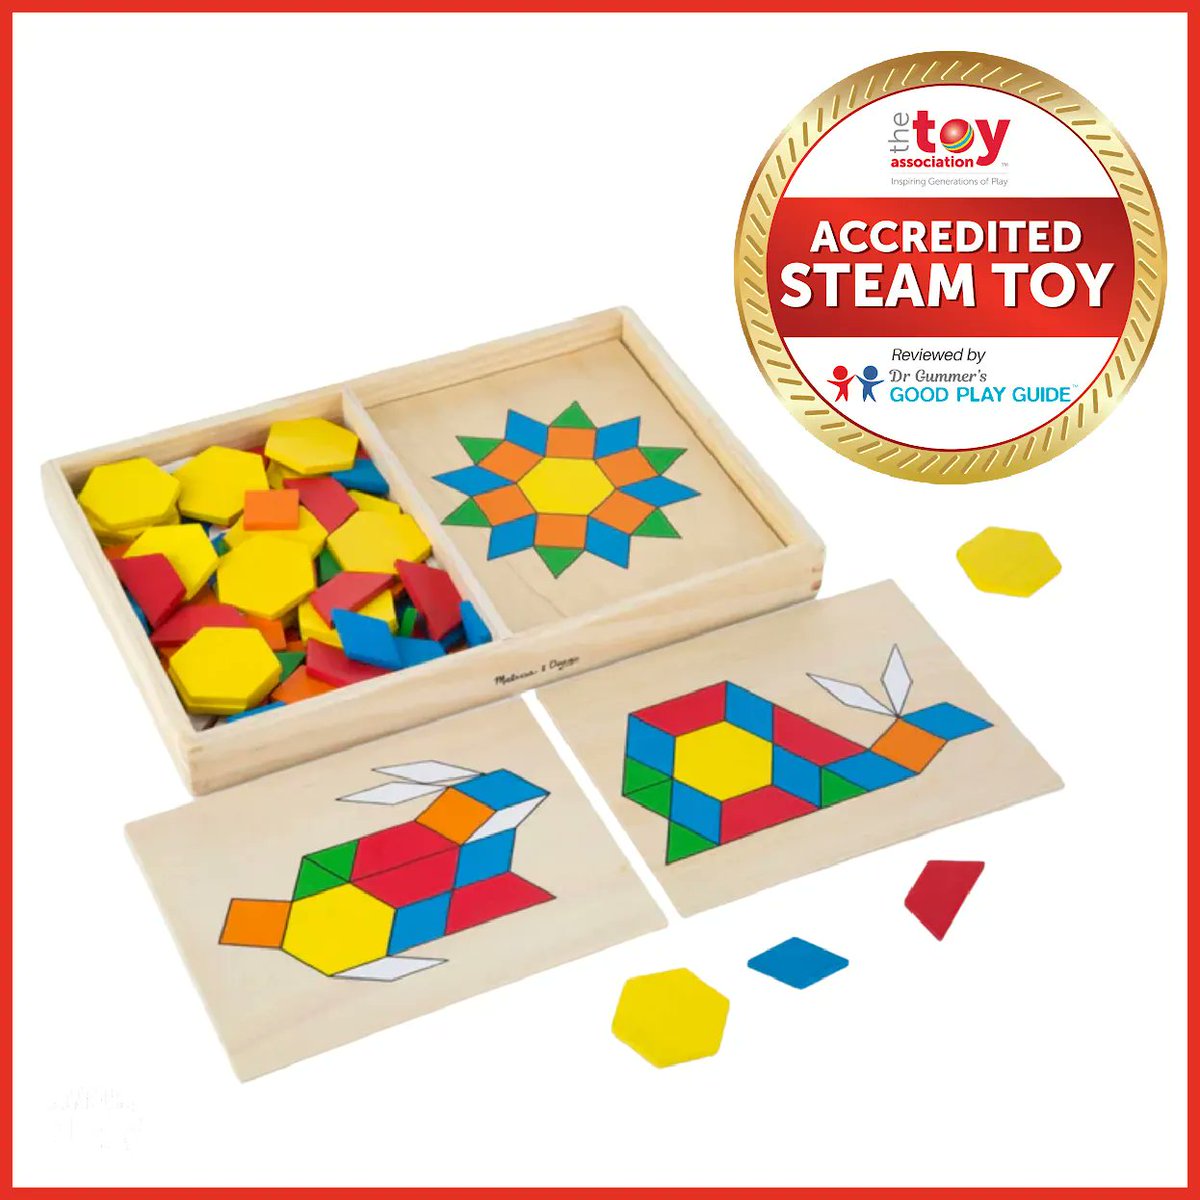 @MelissaAndDoug Pattern Blocks and Boards has earned the ️🏅 STEAM ‘stamp of approval’ from The Toy Association and the Good Play Guide! Check out this STEAM Accredited Toy and more to add to your holiday shopping list: buff.ly/3ONROz9 #geniusofplay